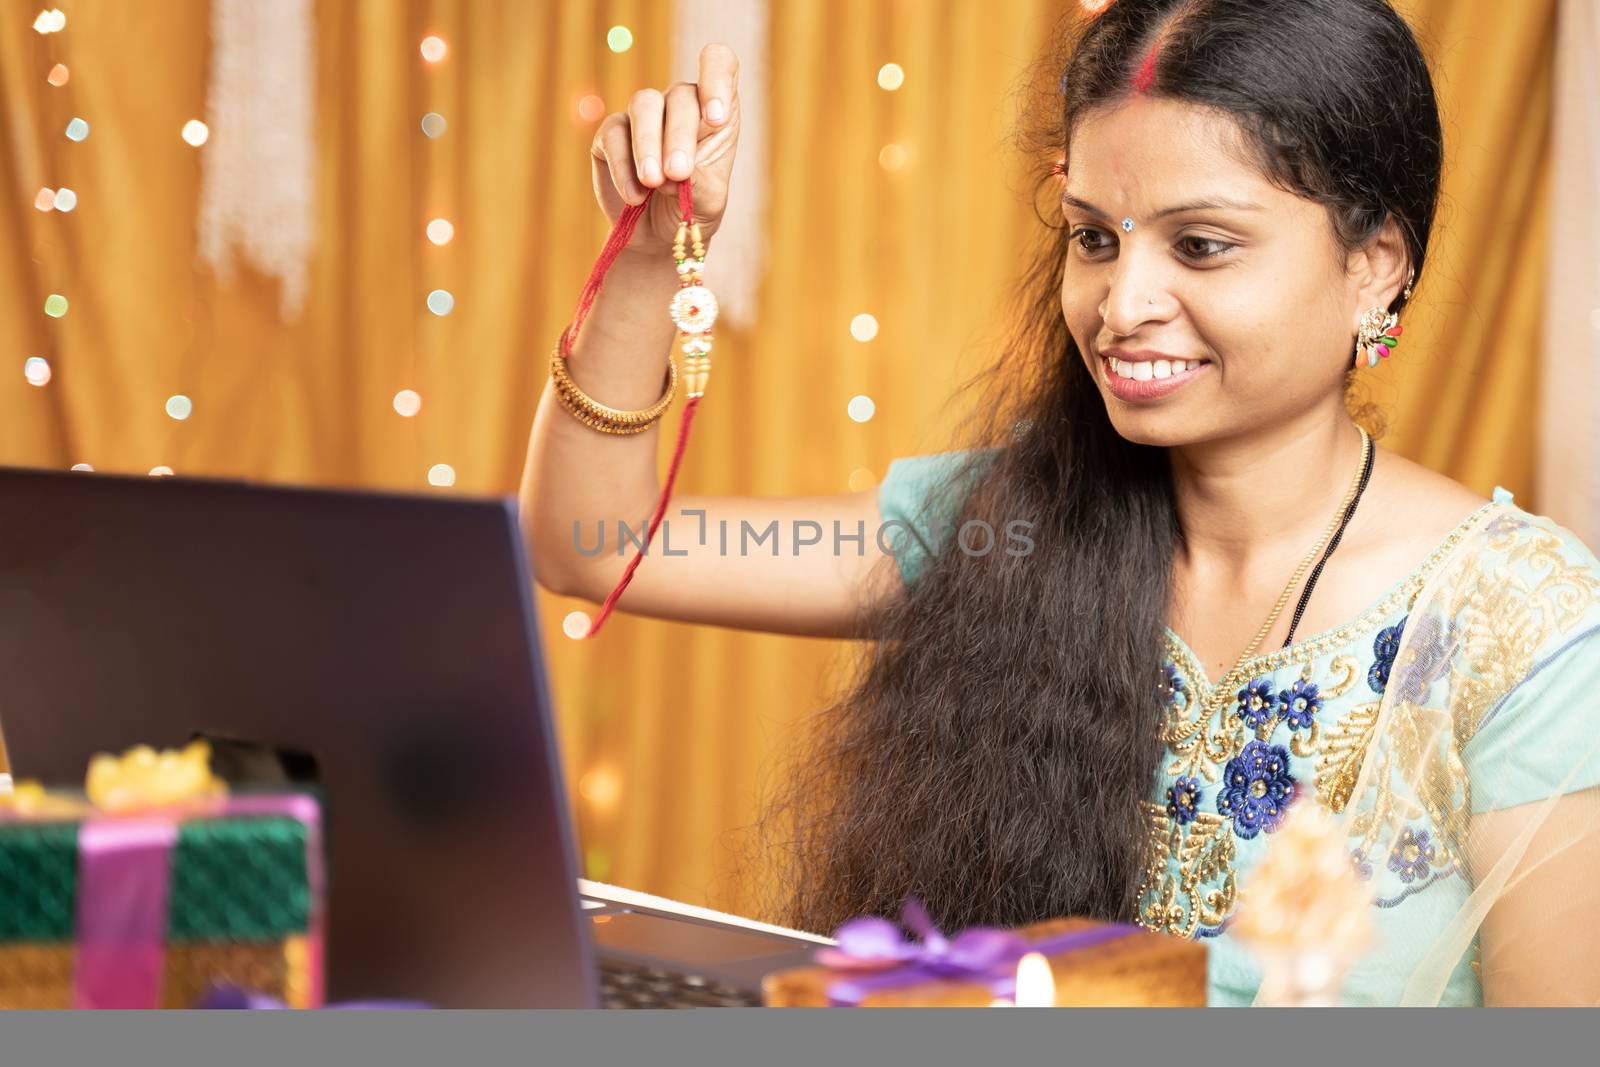 Indian Woman in tradition dress on video call or chat at Raksha Bandhan festival telling her brother to tie rakhi - Concept of distance relations, festival celebrations and technological lifestyle by lakshmiprasad.maski@gmai.com